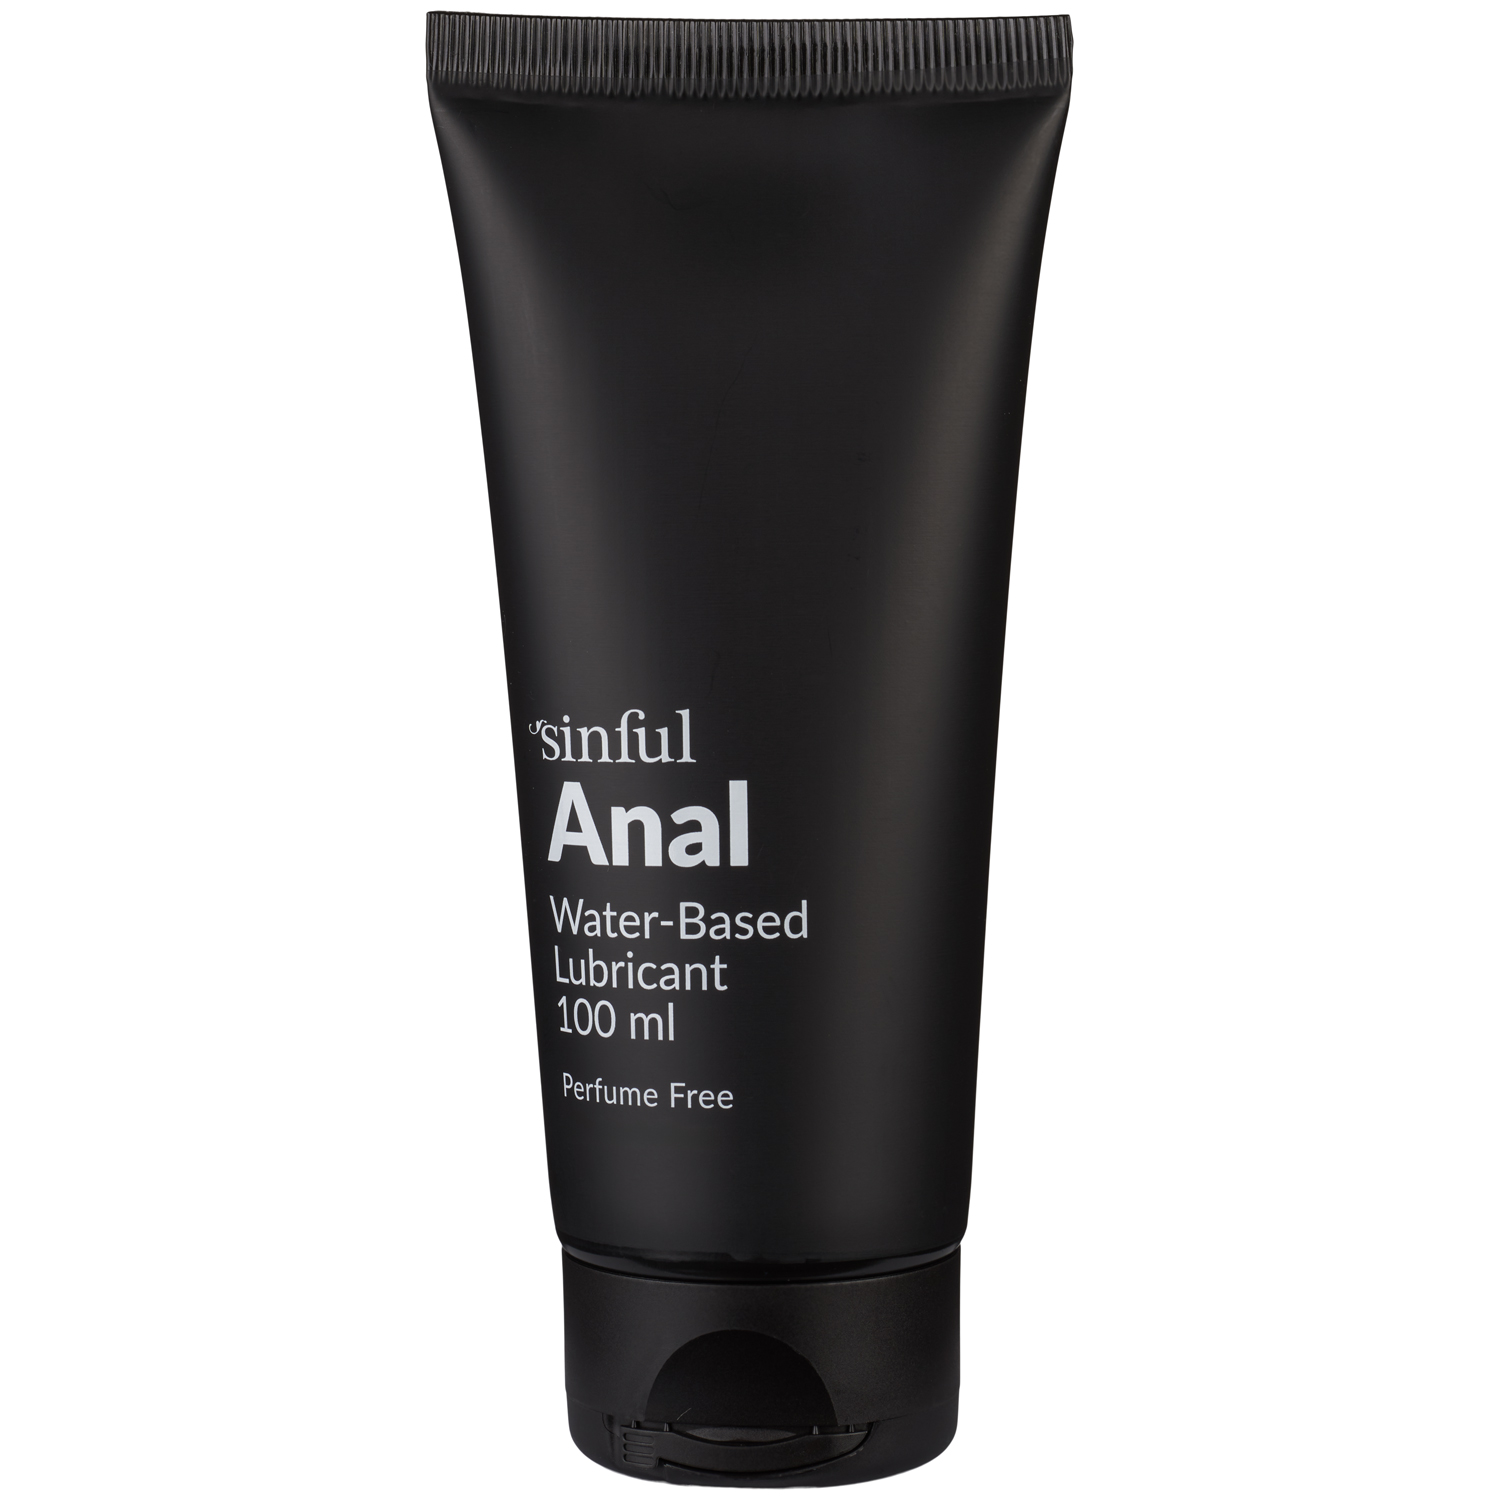 Sinful Anal Water-based Lube 100 ml - Buy here - Sinful.com